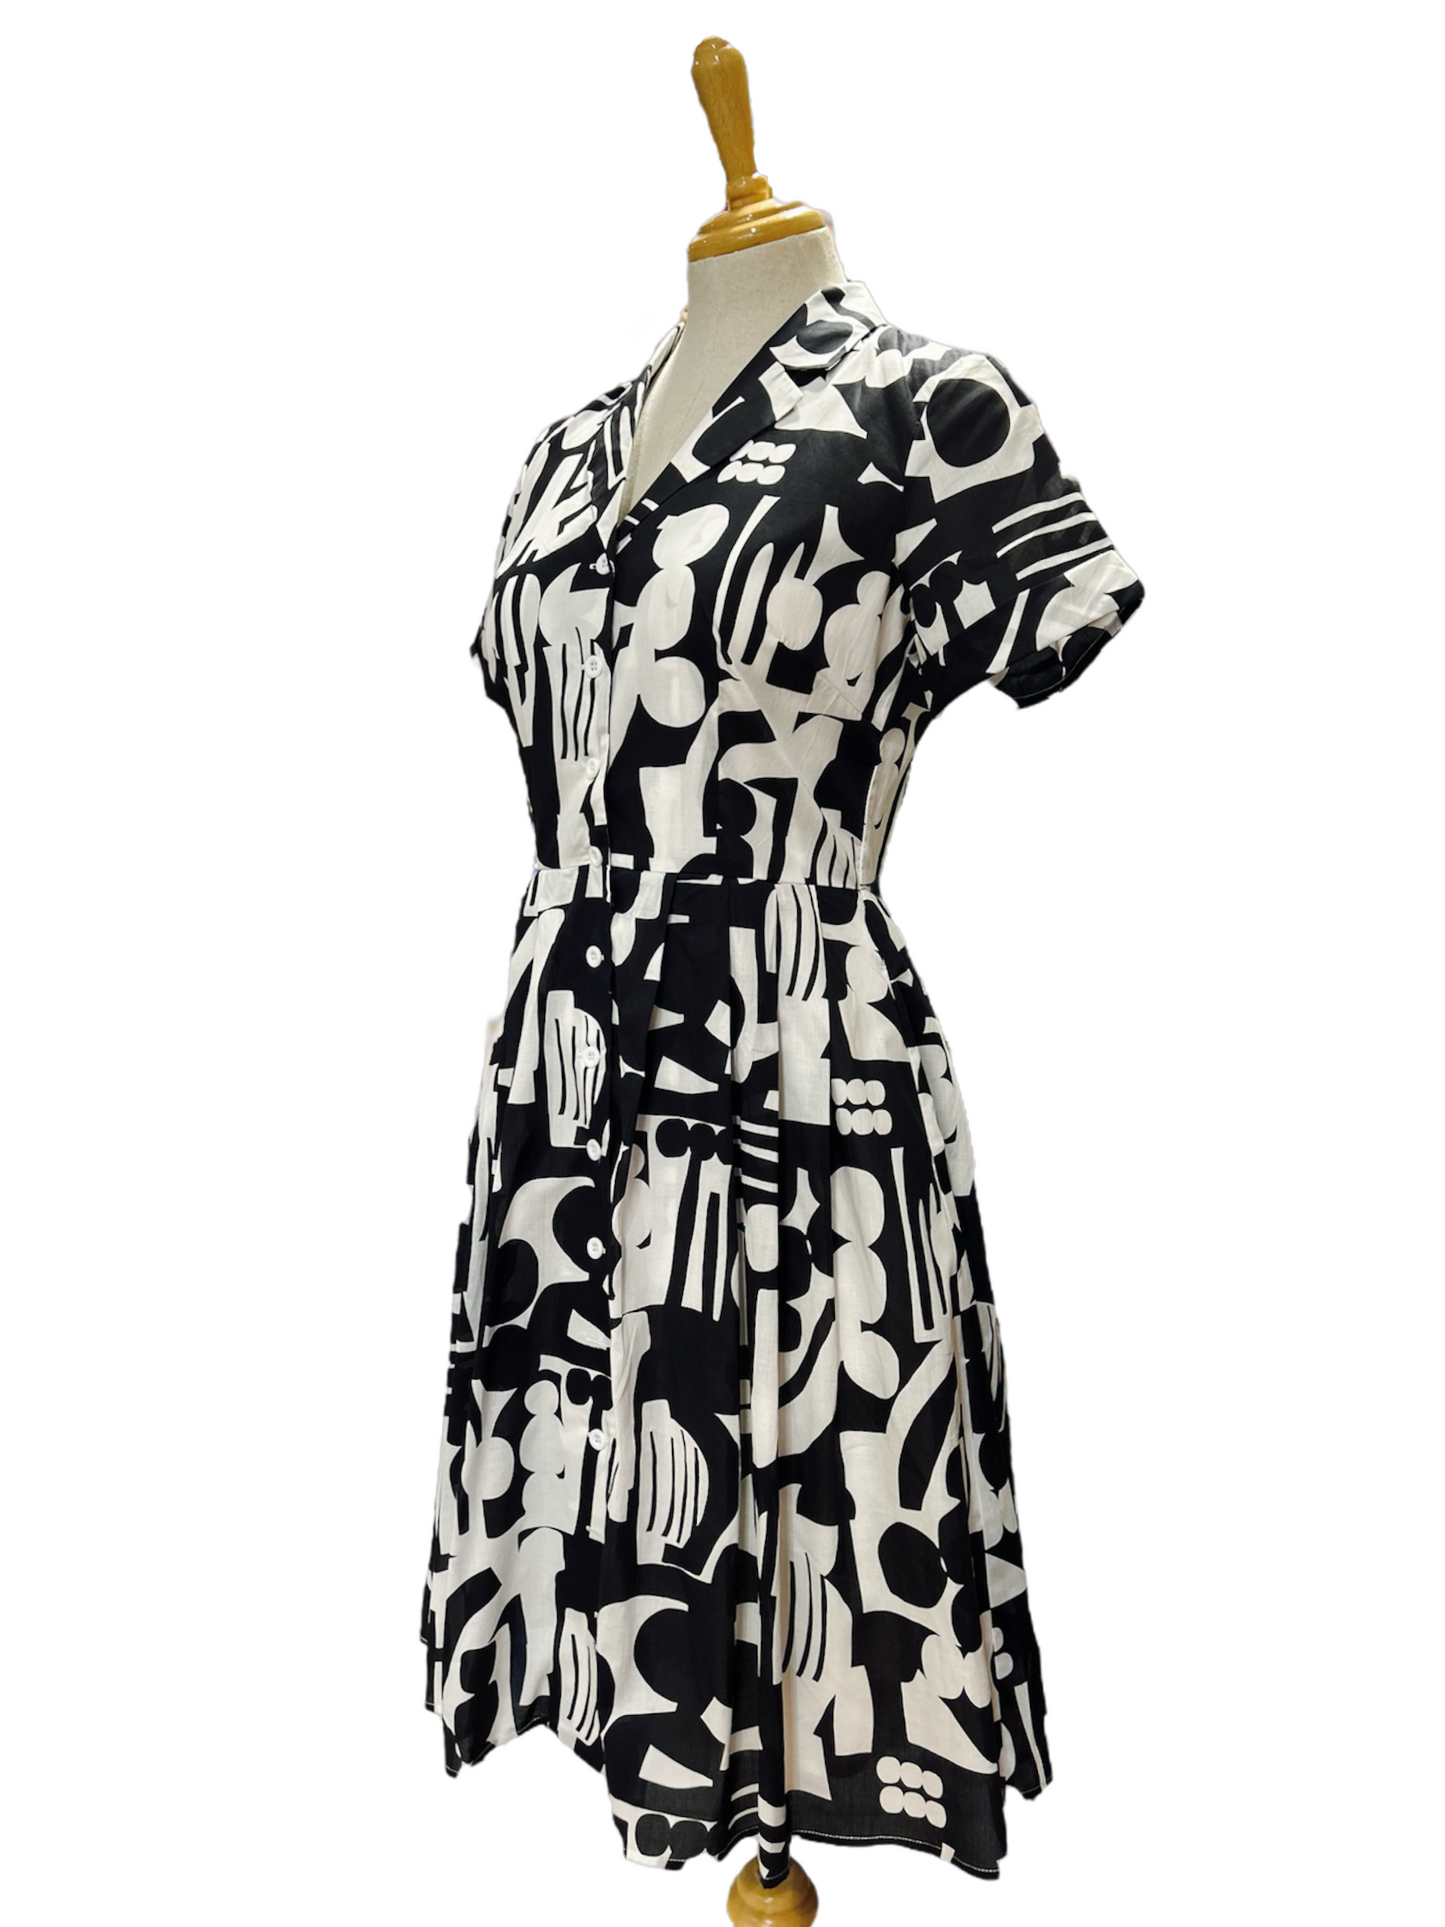 Arabella Dress - black and white abstract (only 16 & 18)